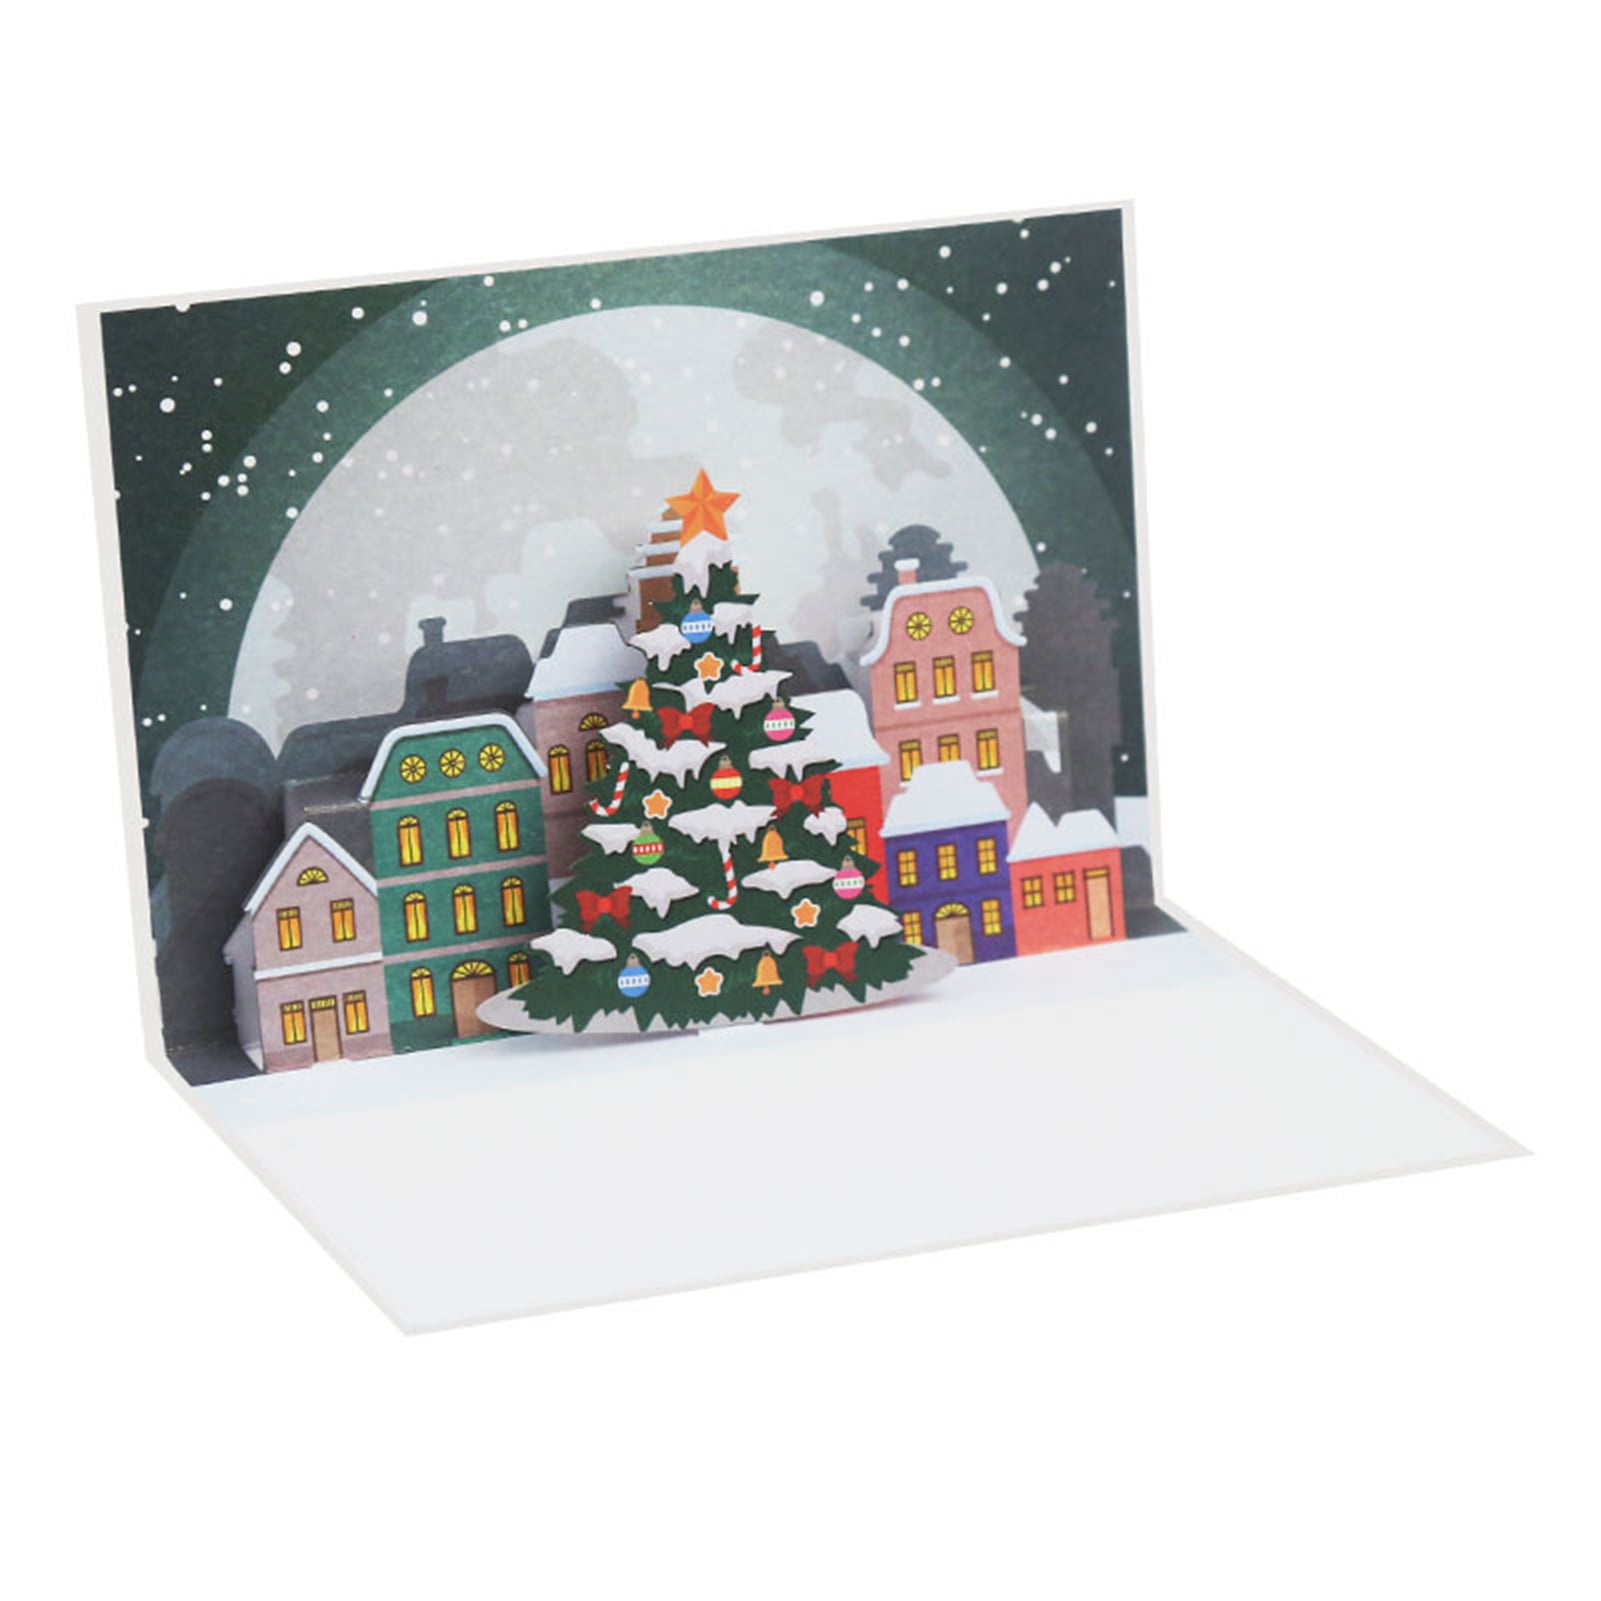 Snowman Add Your Photo 10cm x 15cm 6 x Photo Christmas Cards with Envelopes